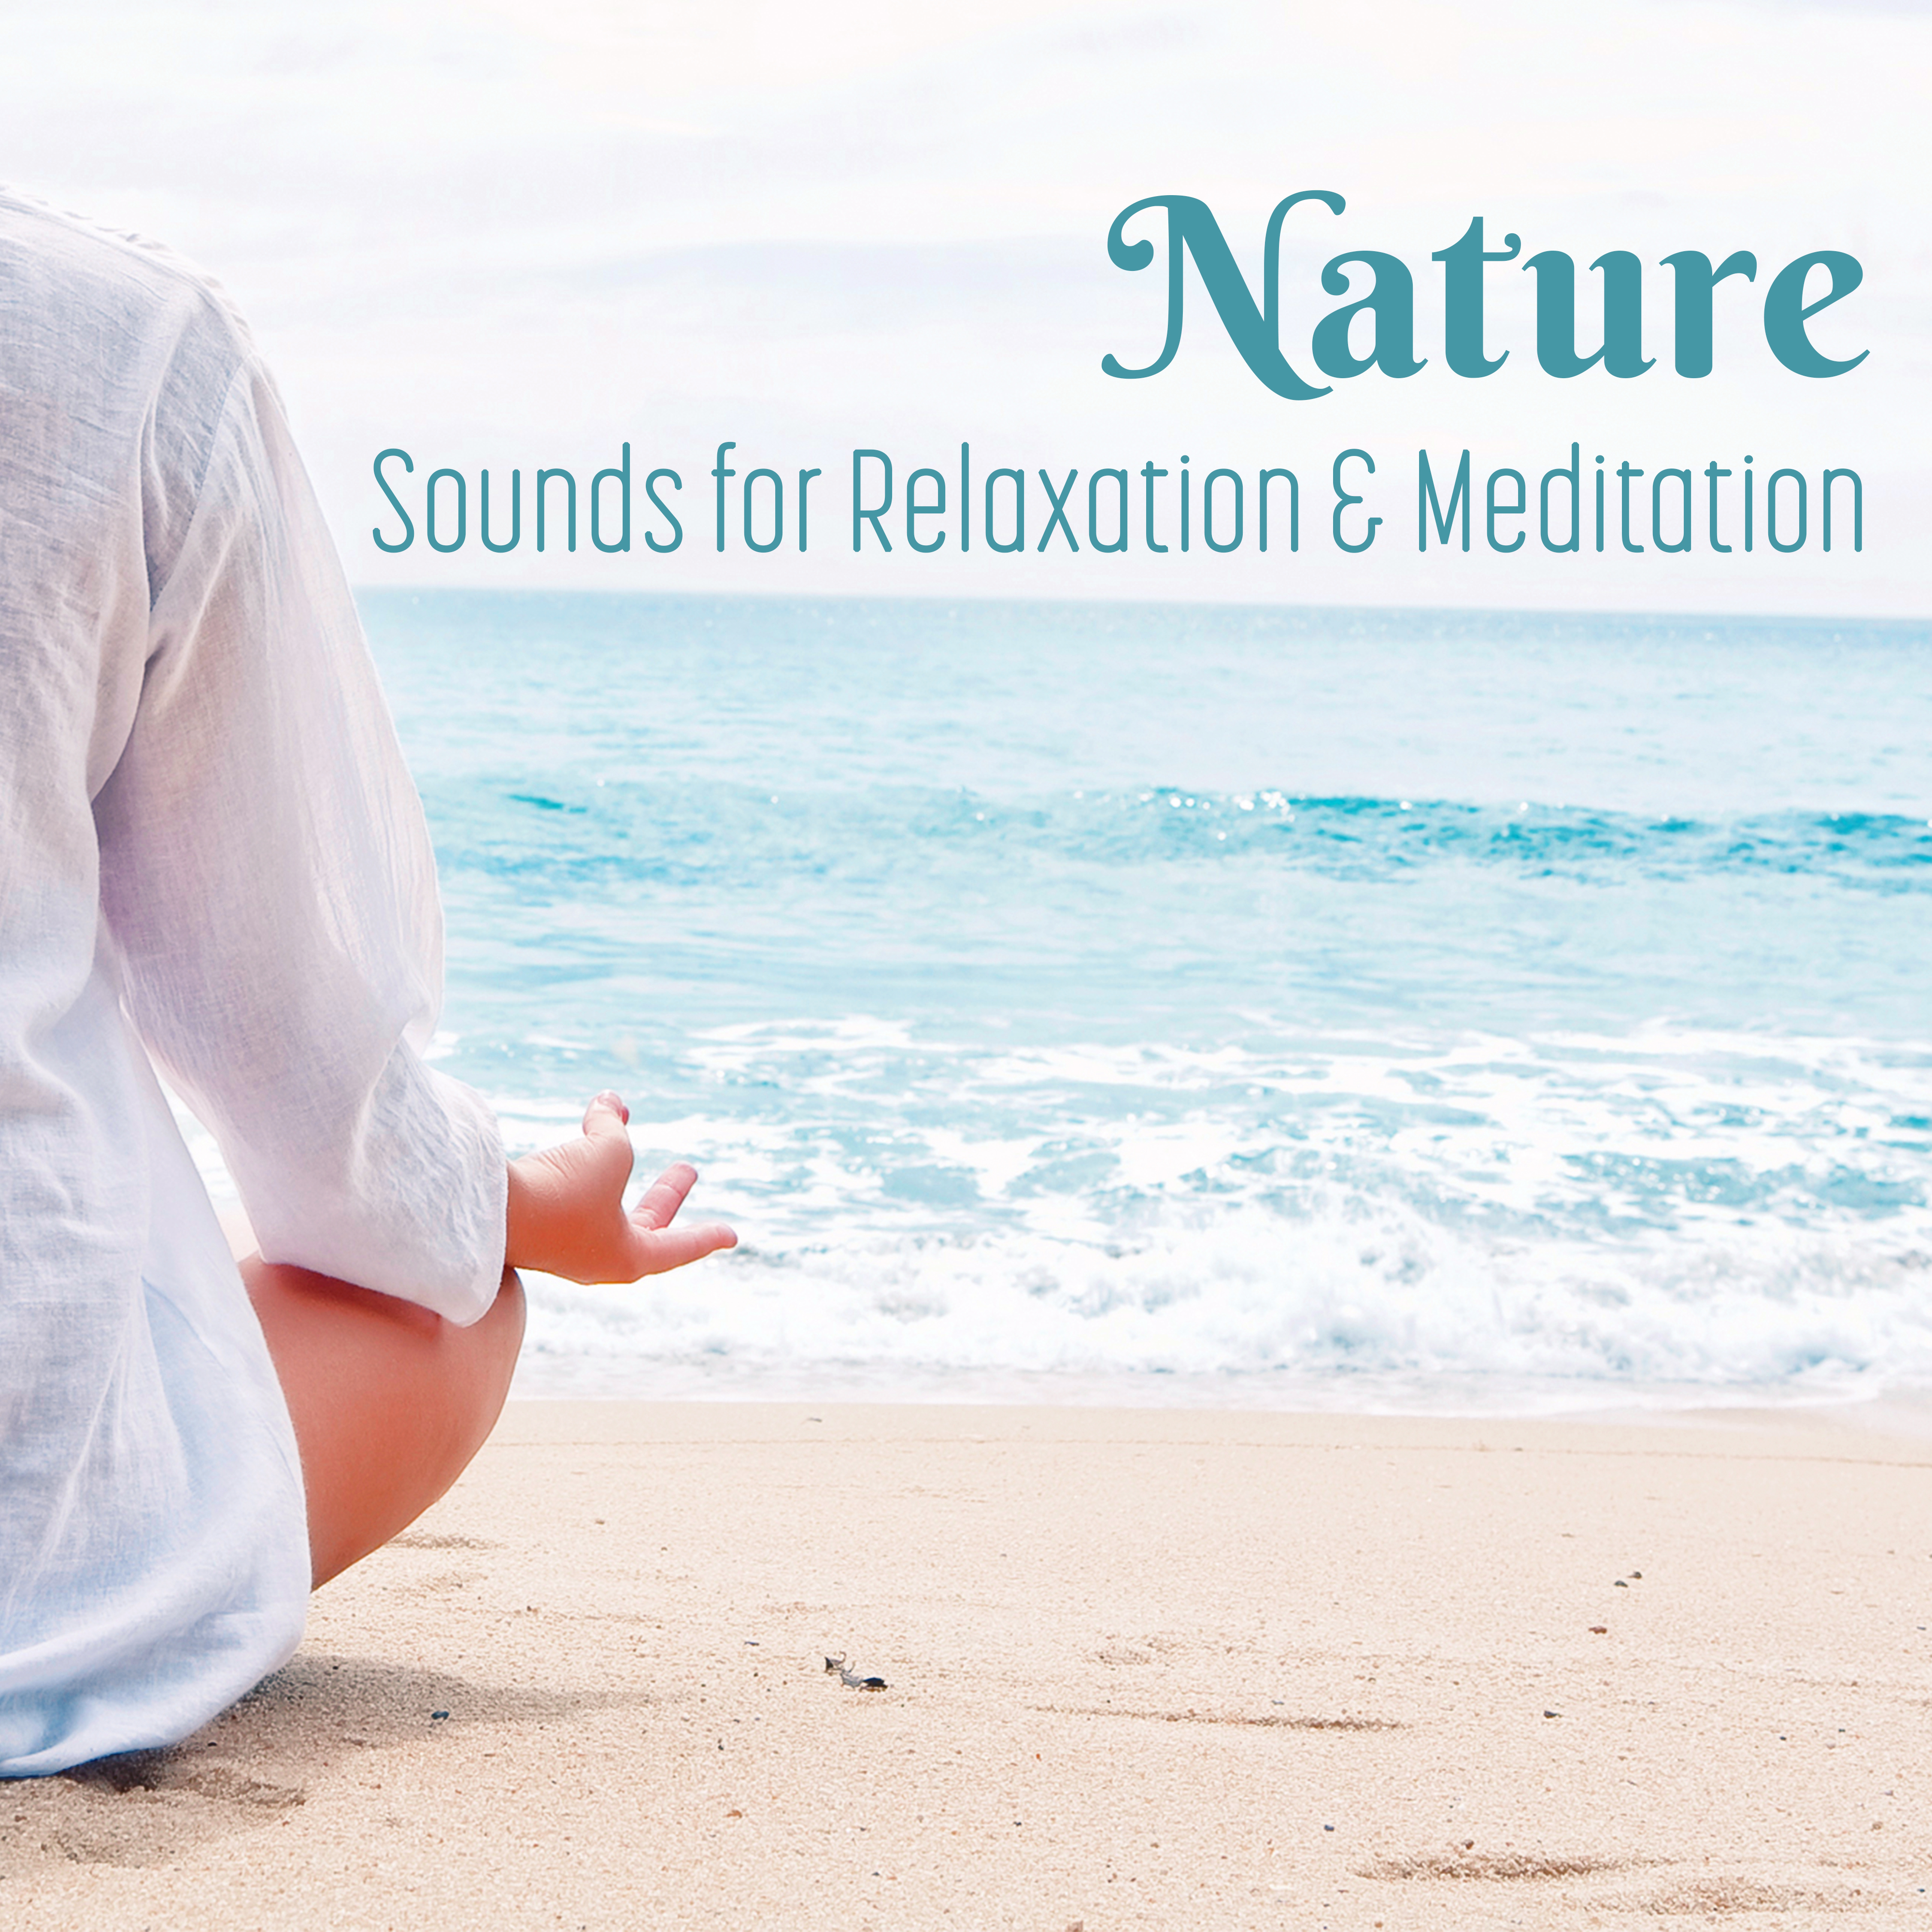 Nature Sounds for Relaxation & Meditation